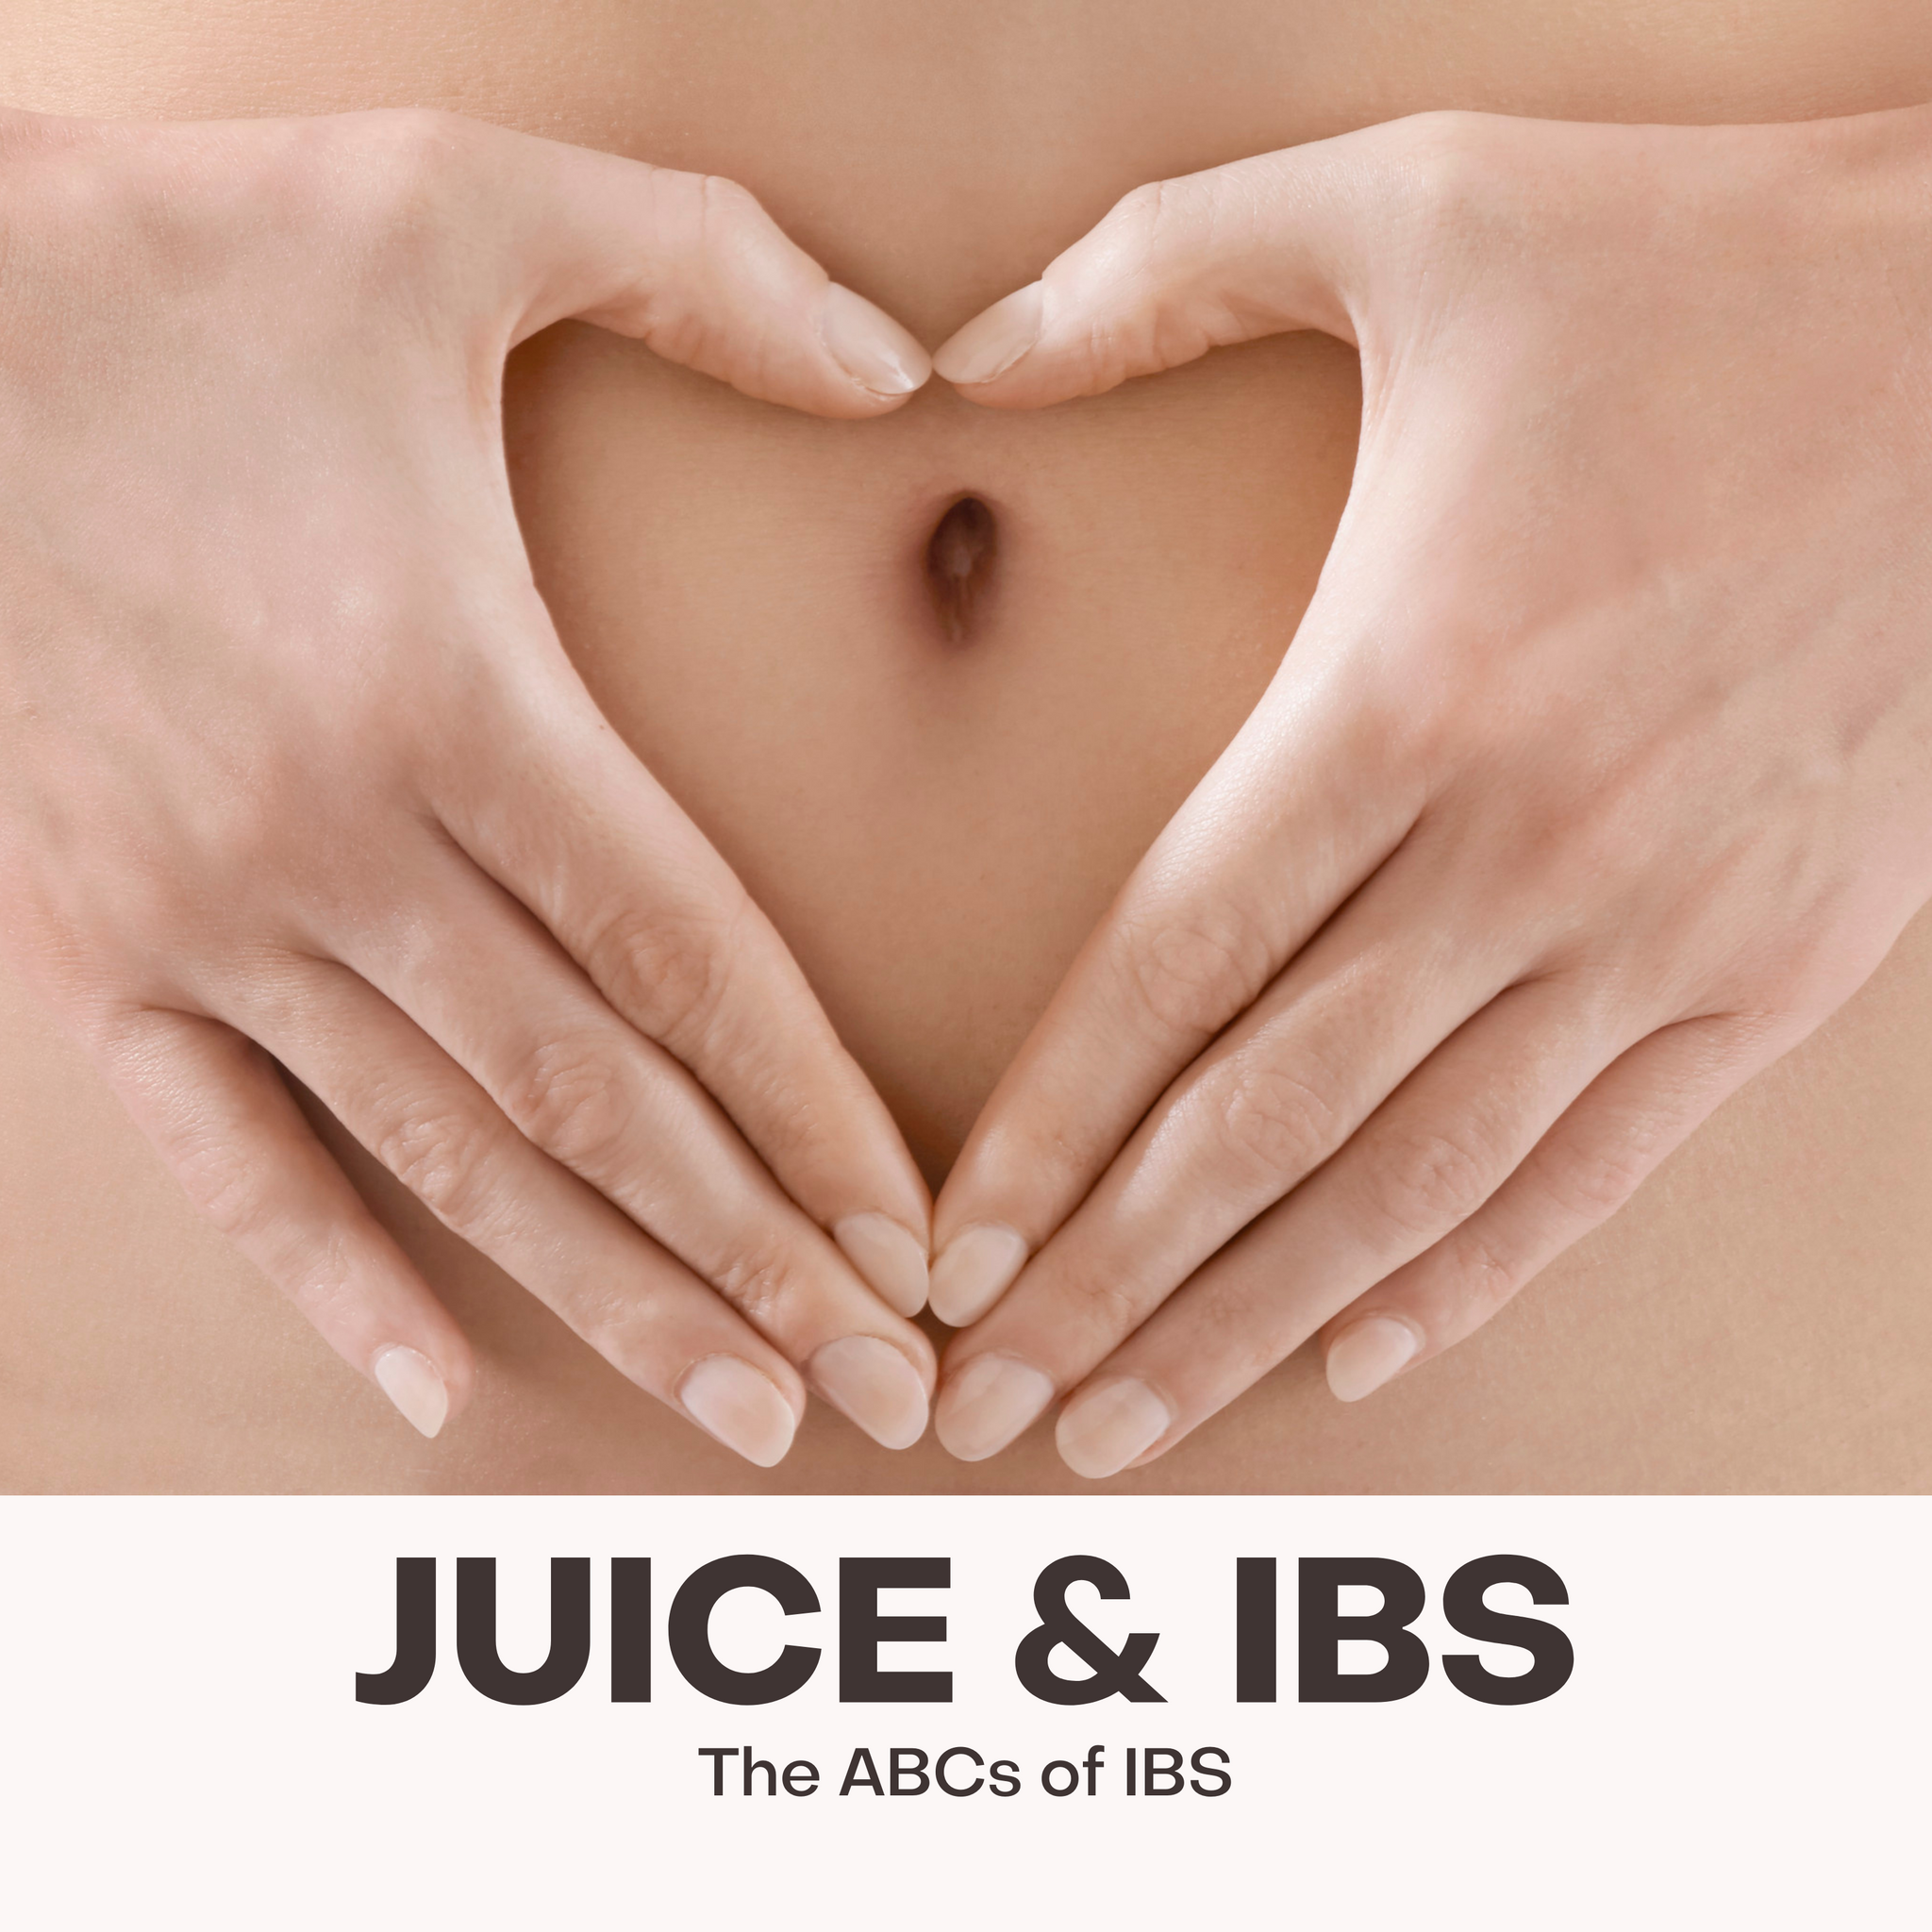 The ABC's of IBS